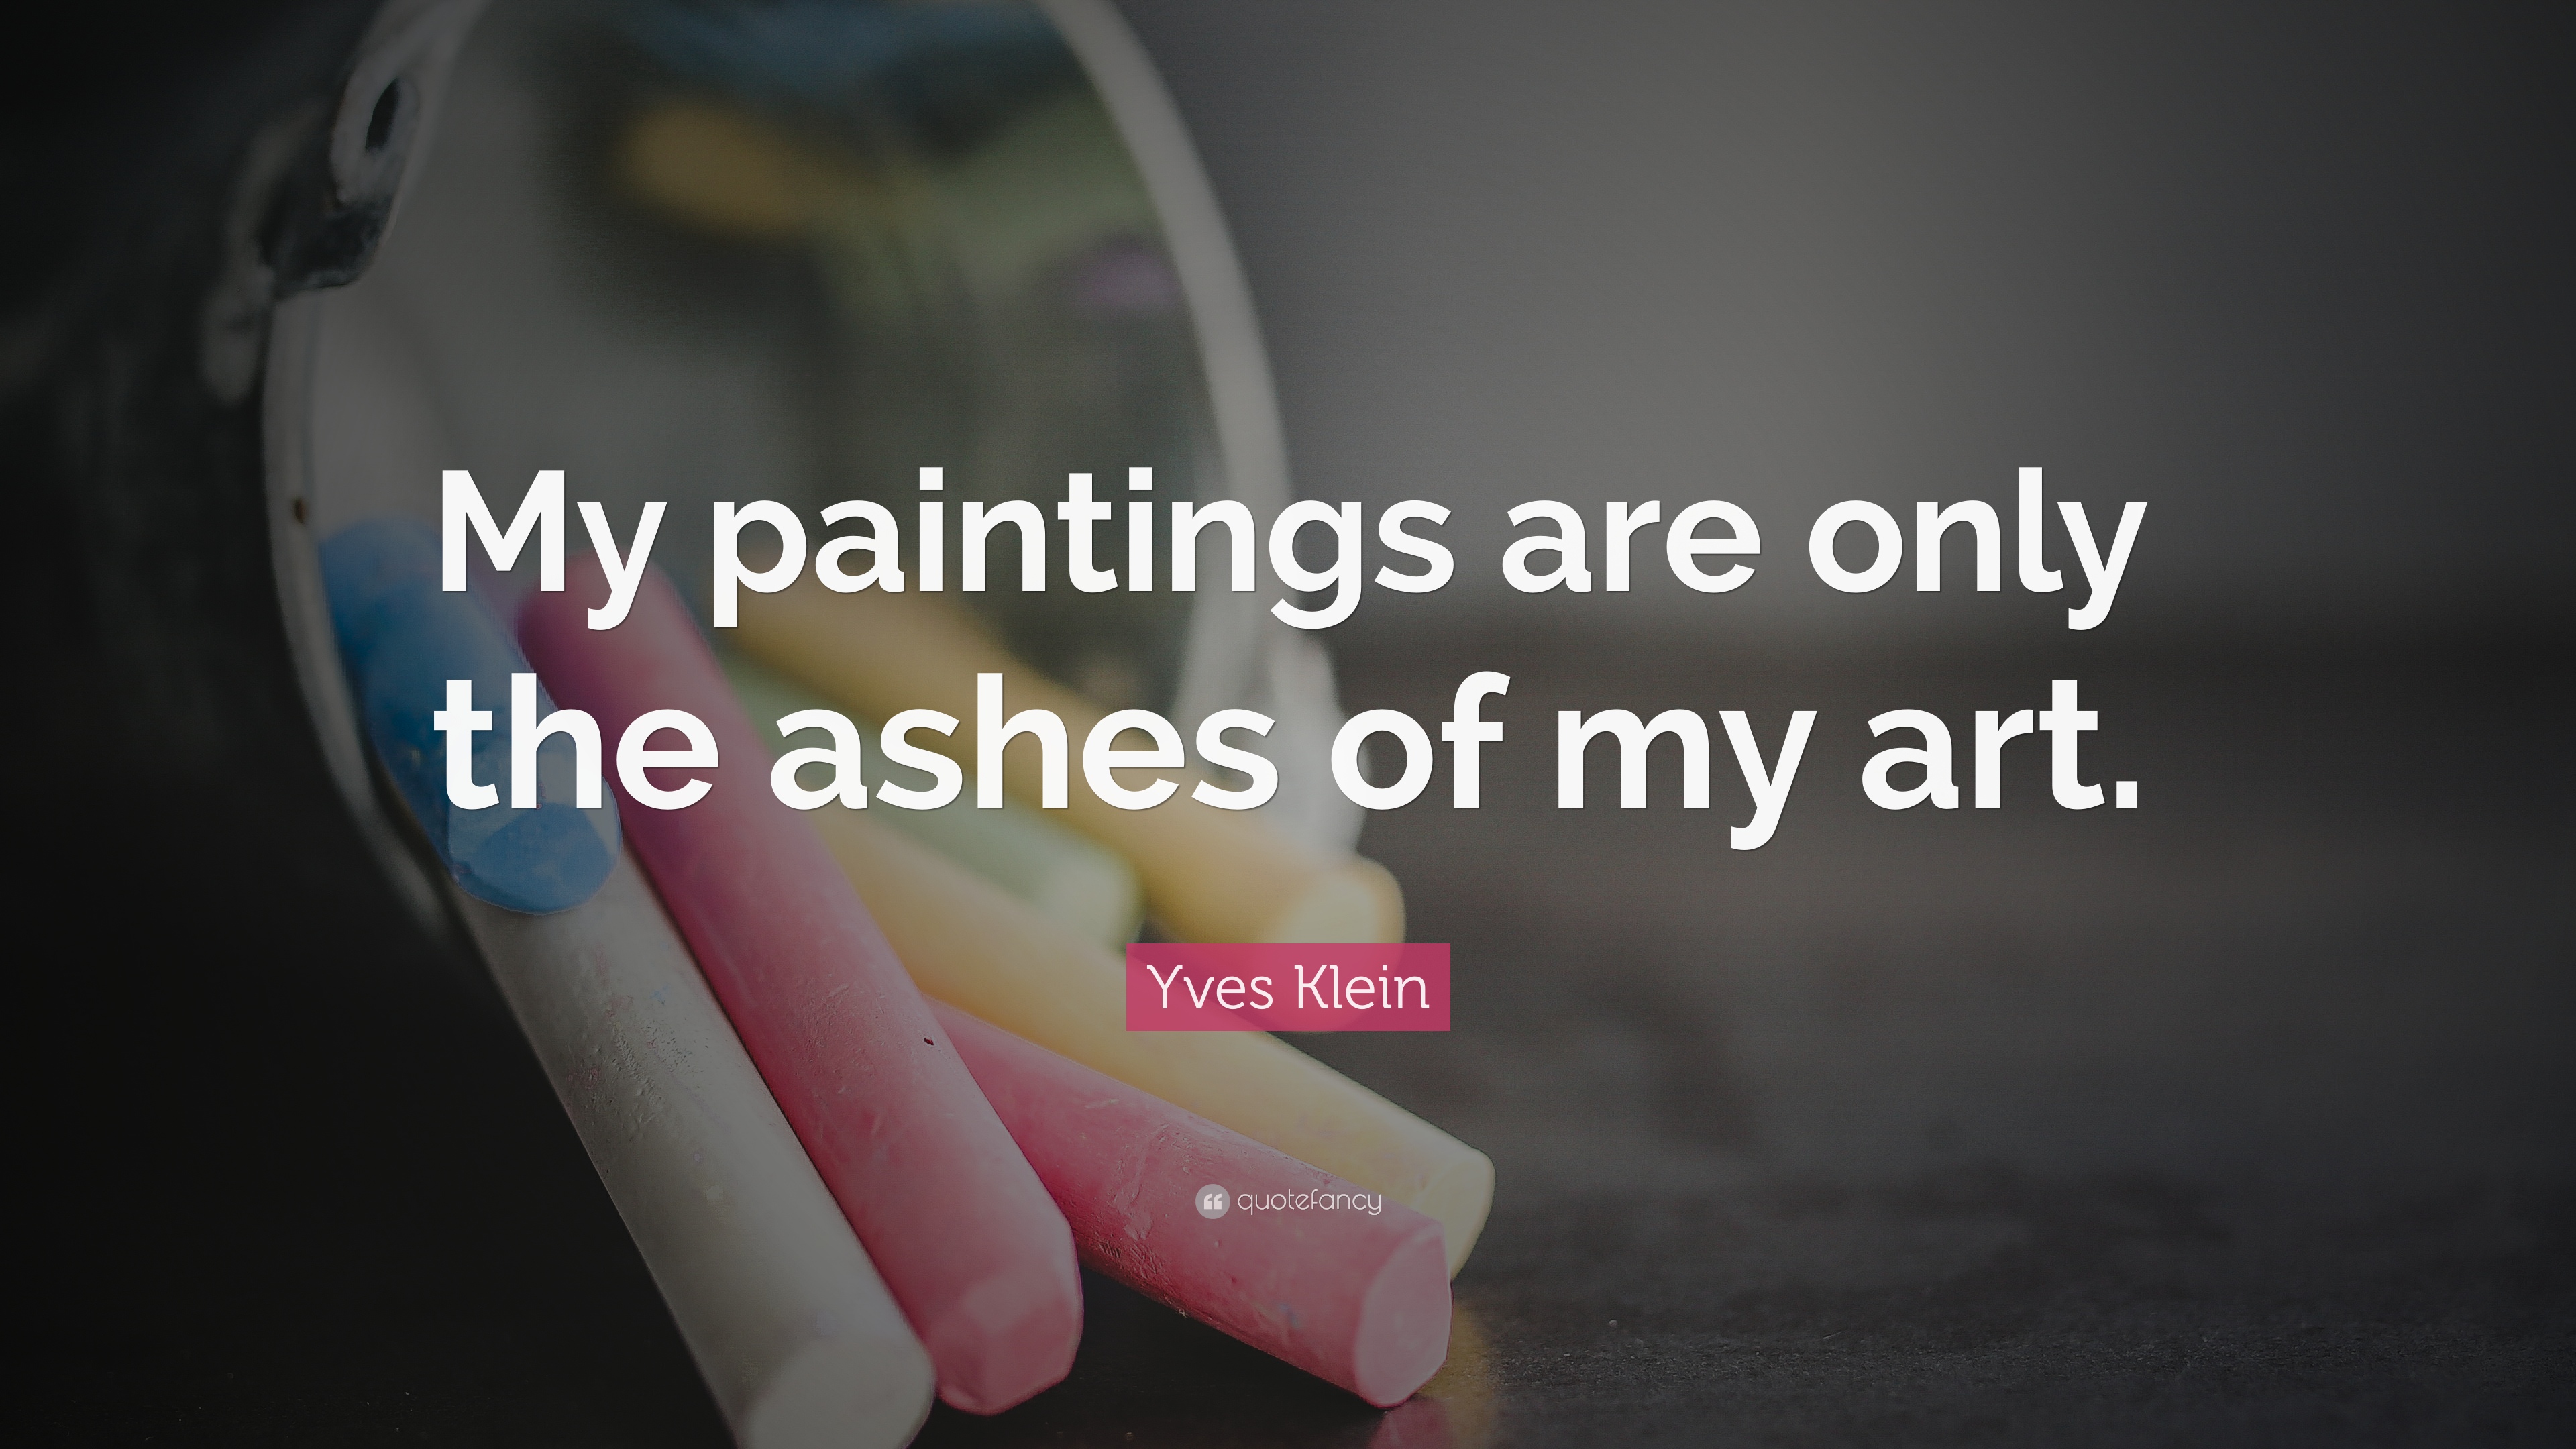 Yves Klein Quote: “My paintings are only the ashes of my art